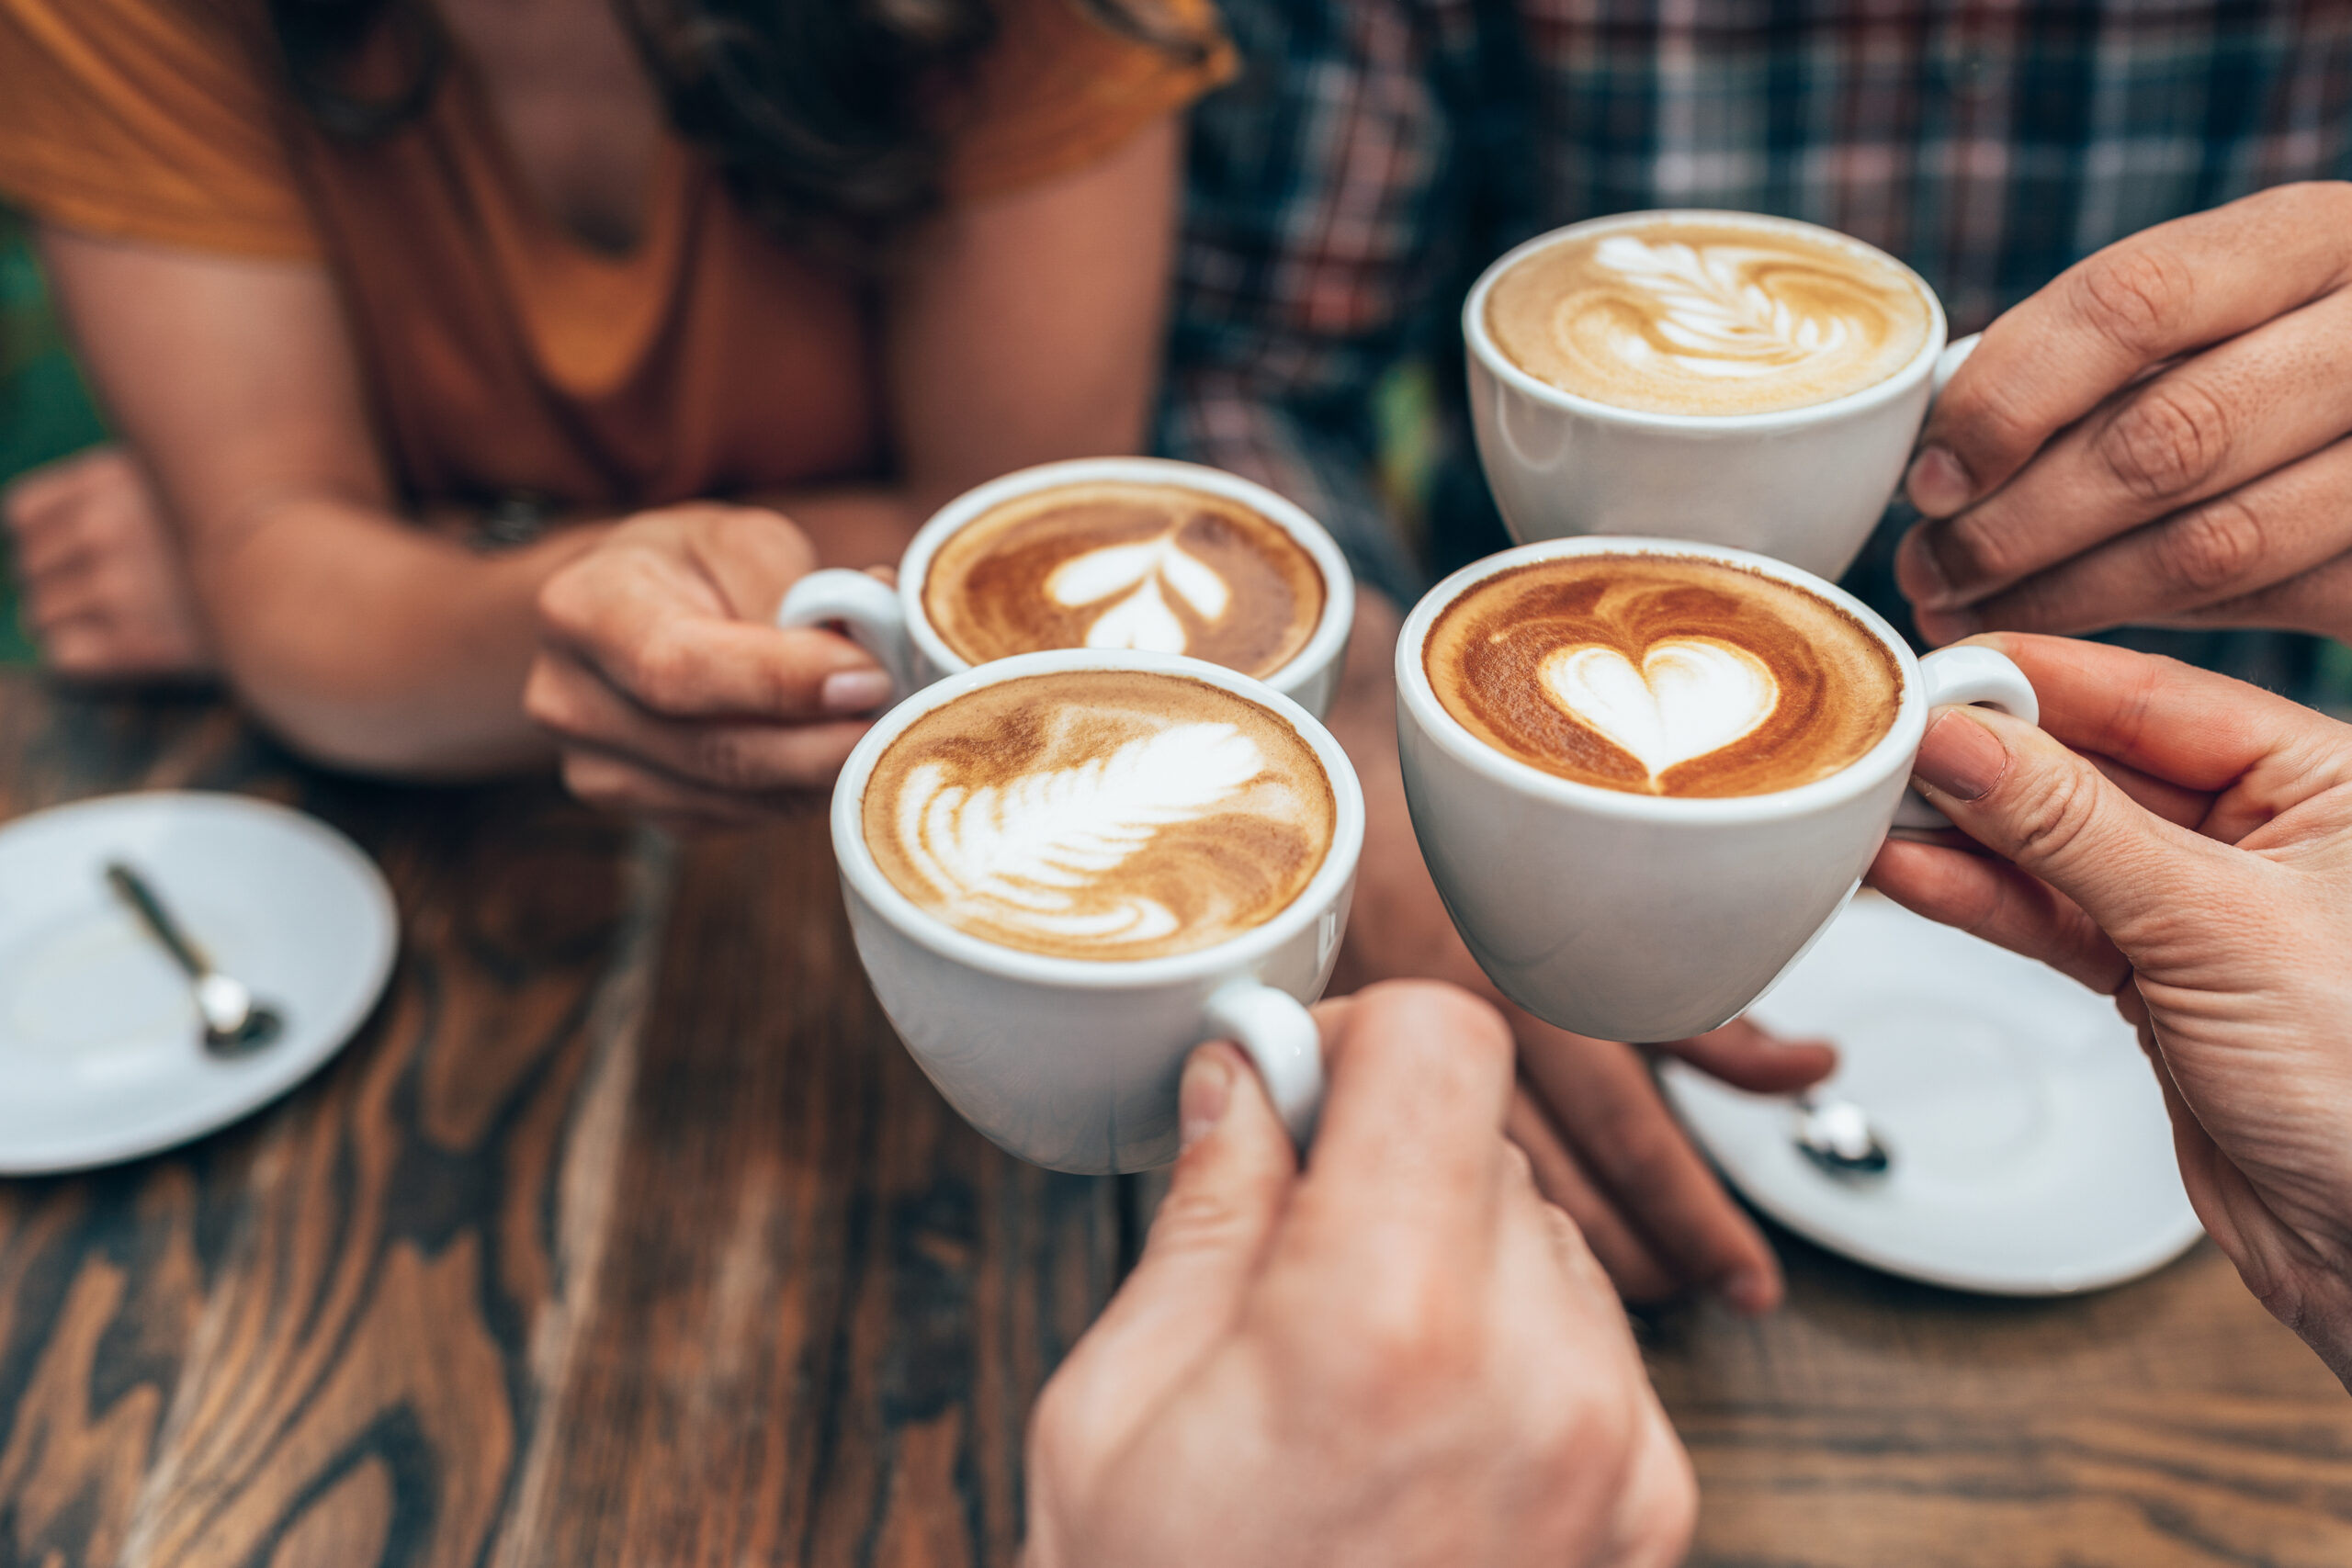 People hands holding cups of cappuccino. Friends drinking coffee together. Hands holding modern looking cups of cappuccino. Tasty and good looking coffee.